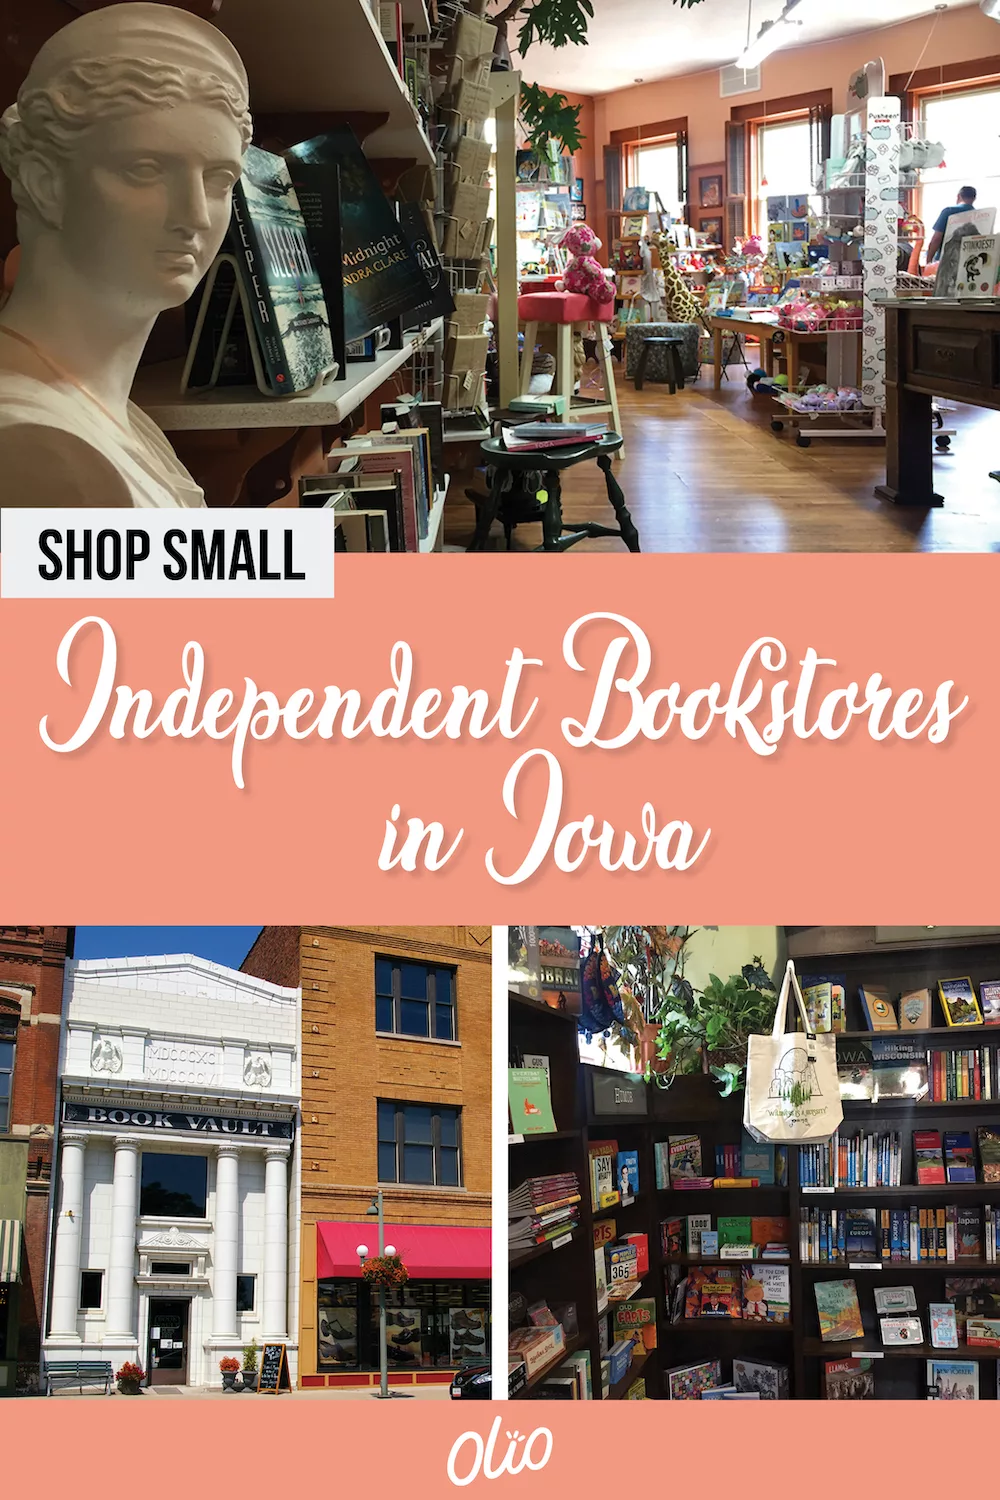 Looking for your next read? Shop small by support one of these independent bookstores in Iowa! These cozy shops have books for readers of all ages and can be found across the Hawkeye state. #Iowa #Midwest